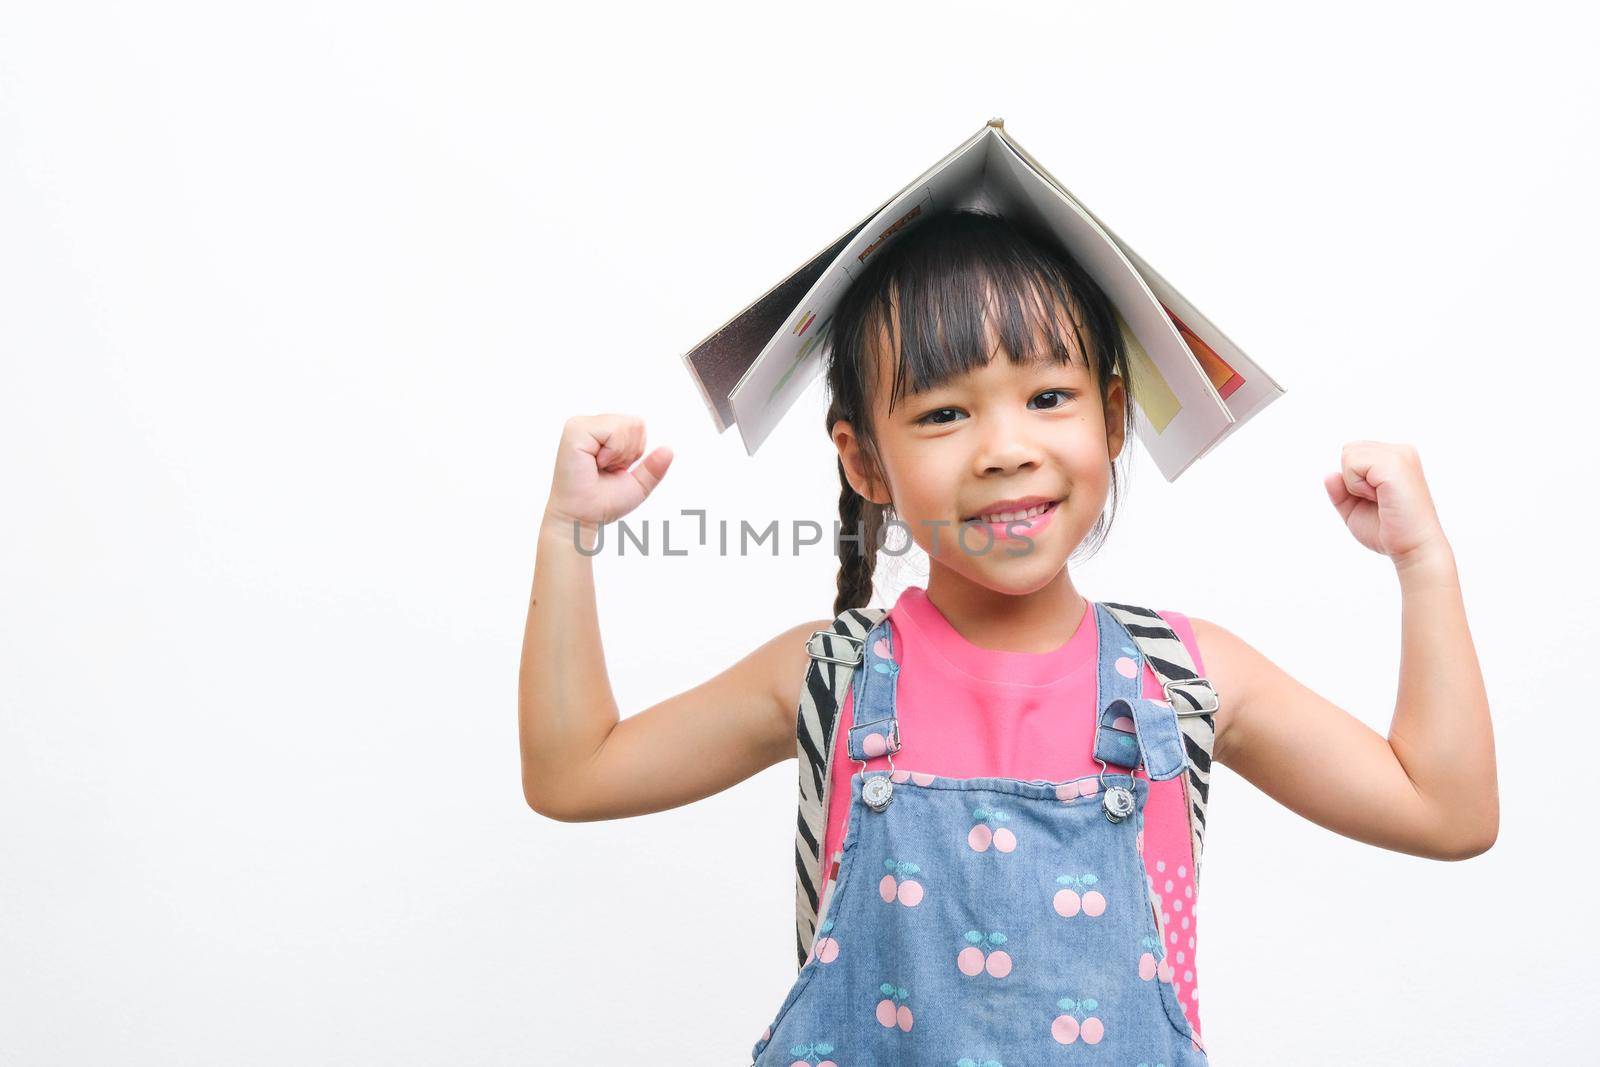 Back to school. Smiling little girl carrying a backpack holding books on her head looking at the camera on a white background with copy space. Girl glad ready to study. by TEERASAK